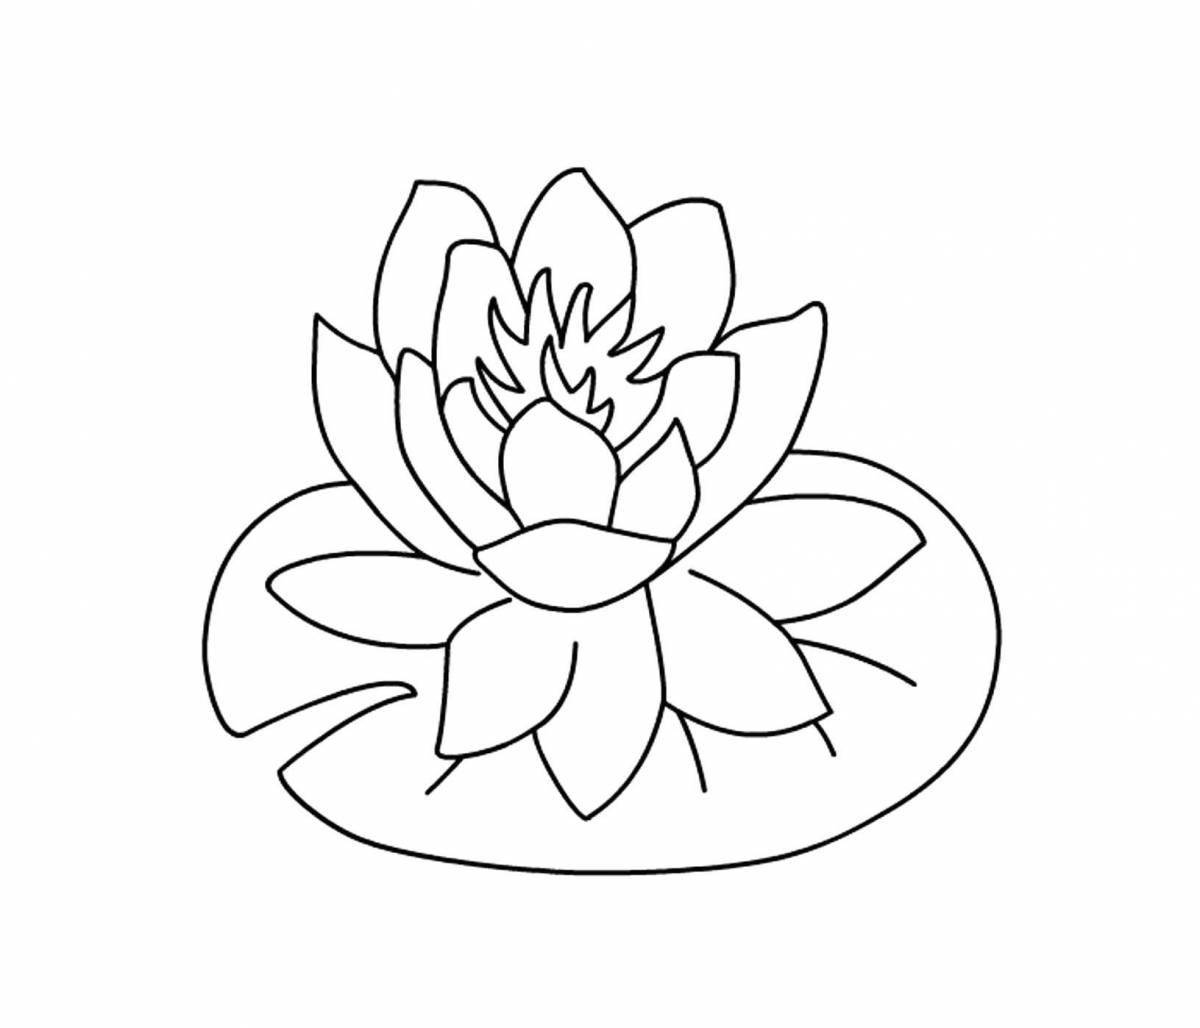 Coloring poetic water lily